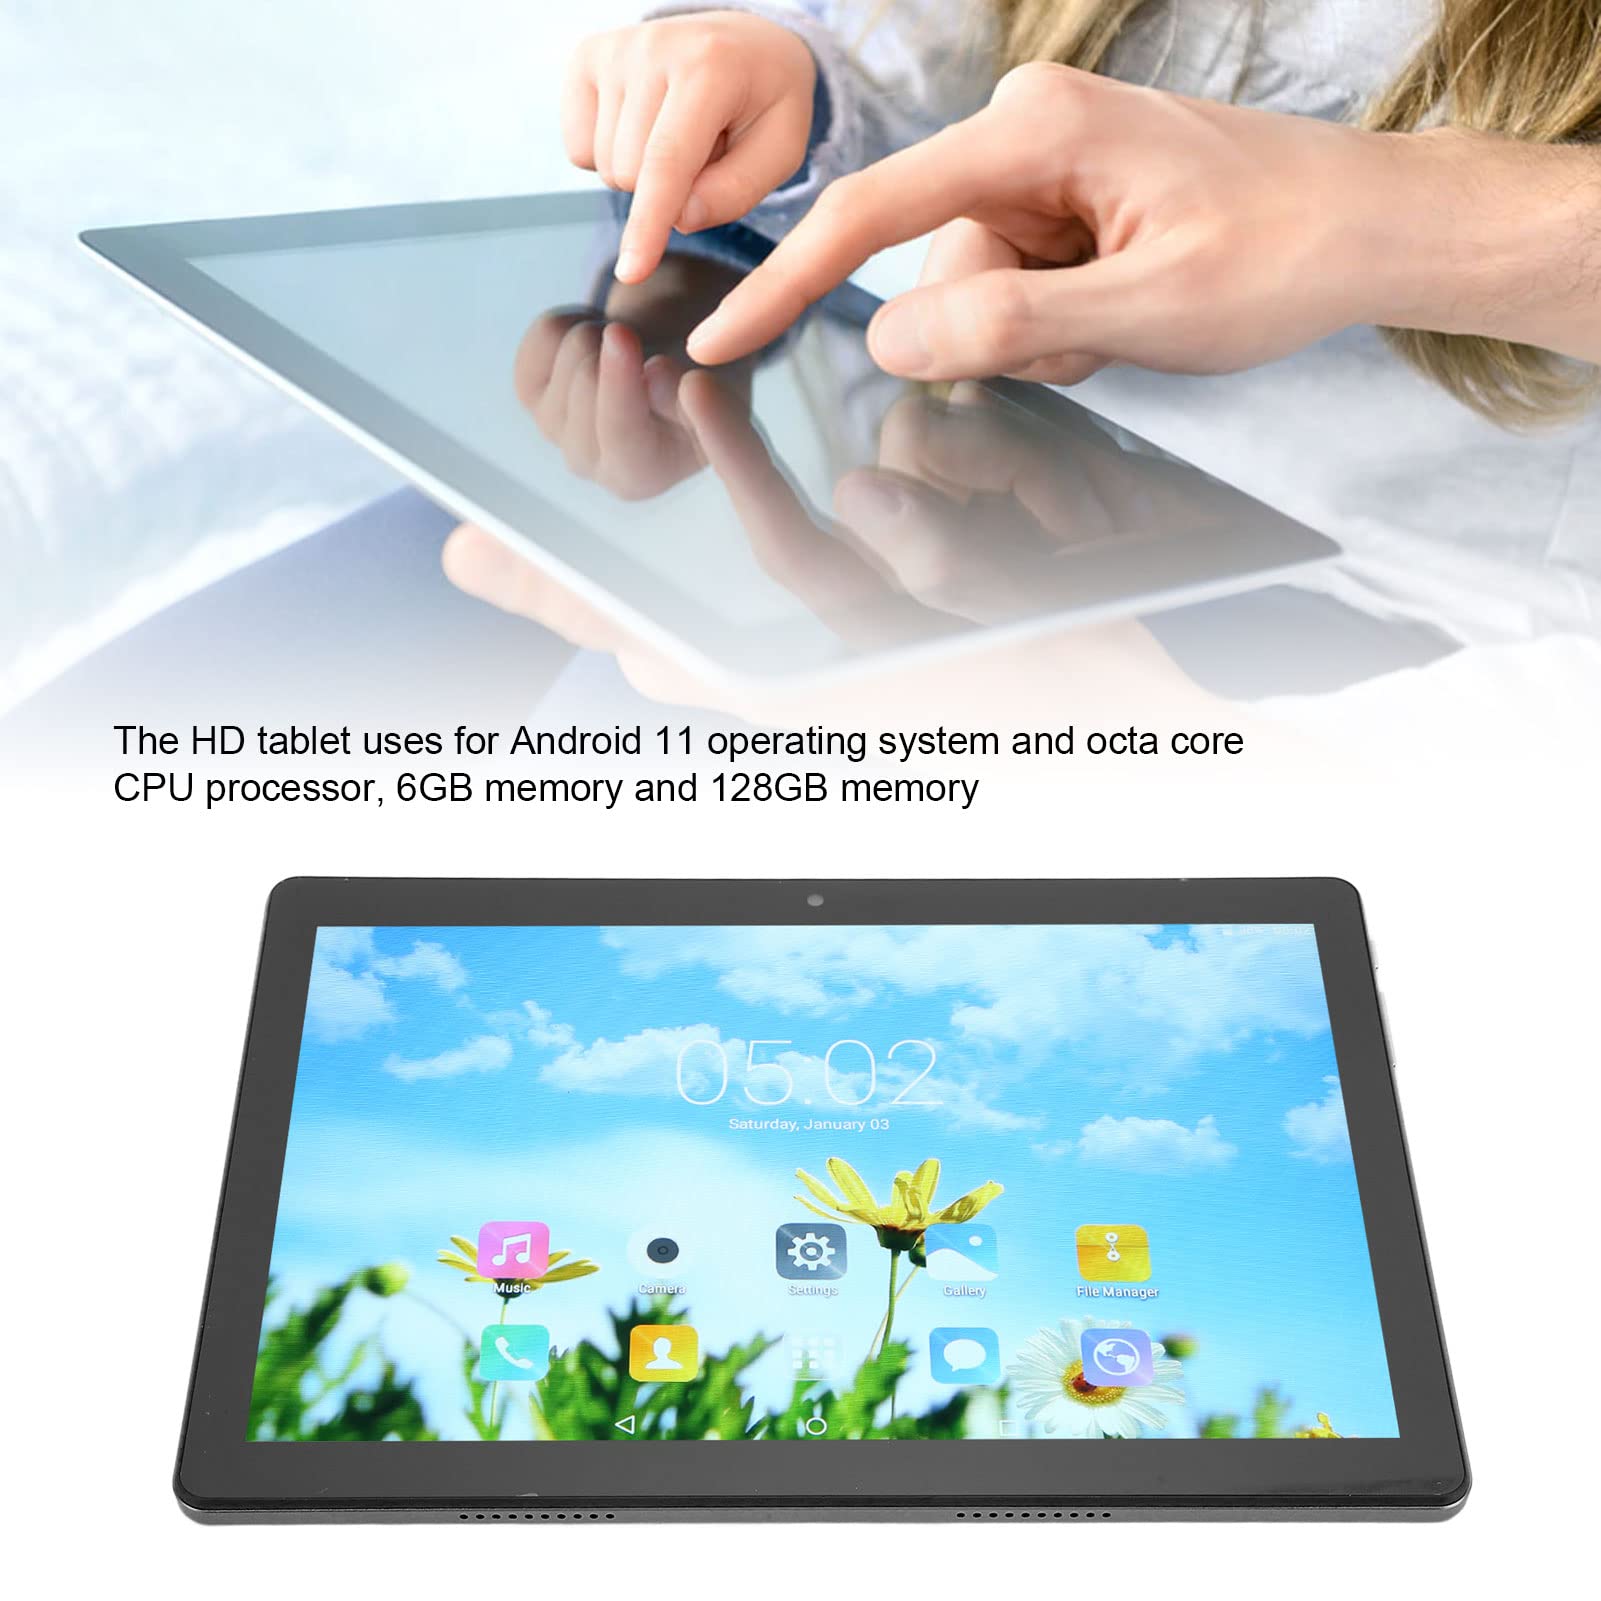 ASHATA 10.1 inch Tablet for Android 11, 1960x1080 Net Tablet with Stylus, 6GB RAM 128GB ROM, 8MP 13MP Camera, 8 Cores 2.5Ghz, 2.4G 5G WiFi, Talkable Tablet for Kids, 8800mAh (Black)